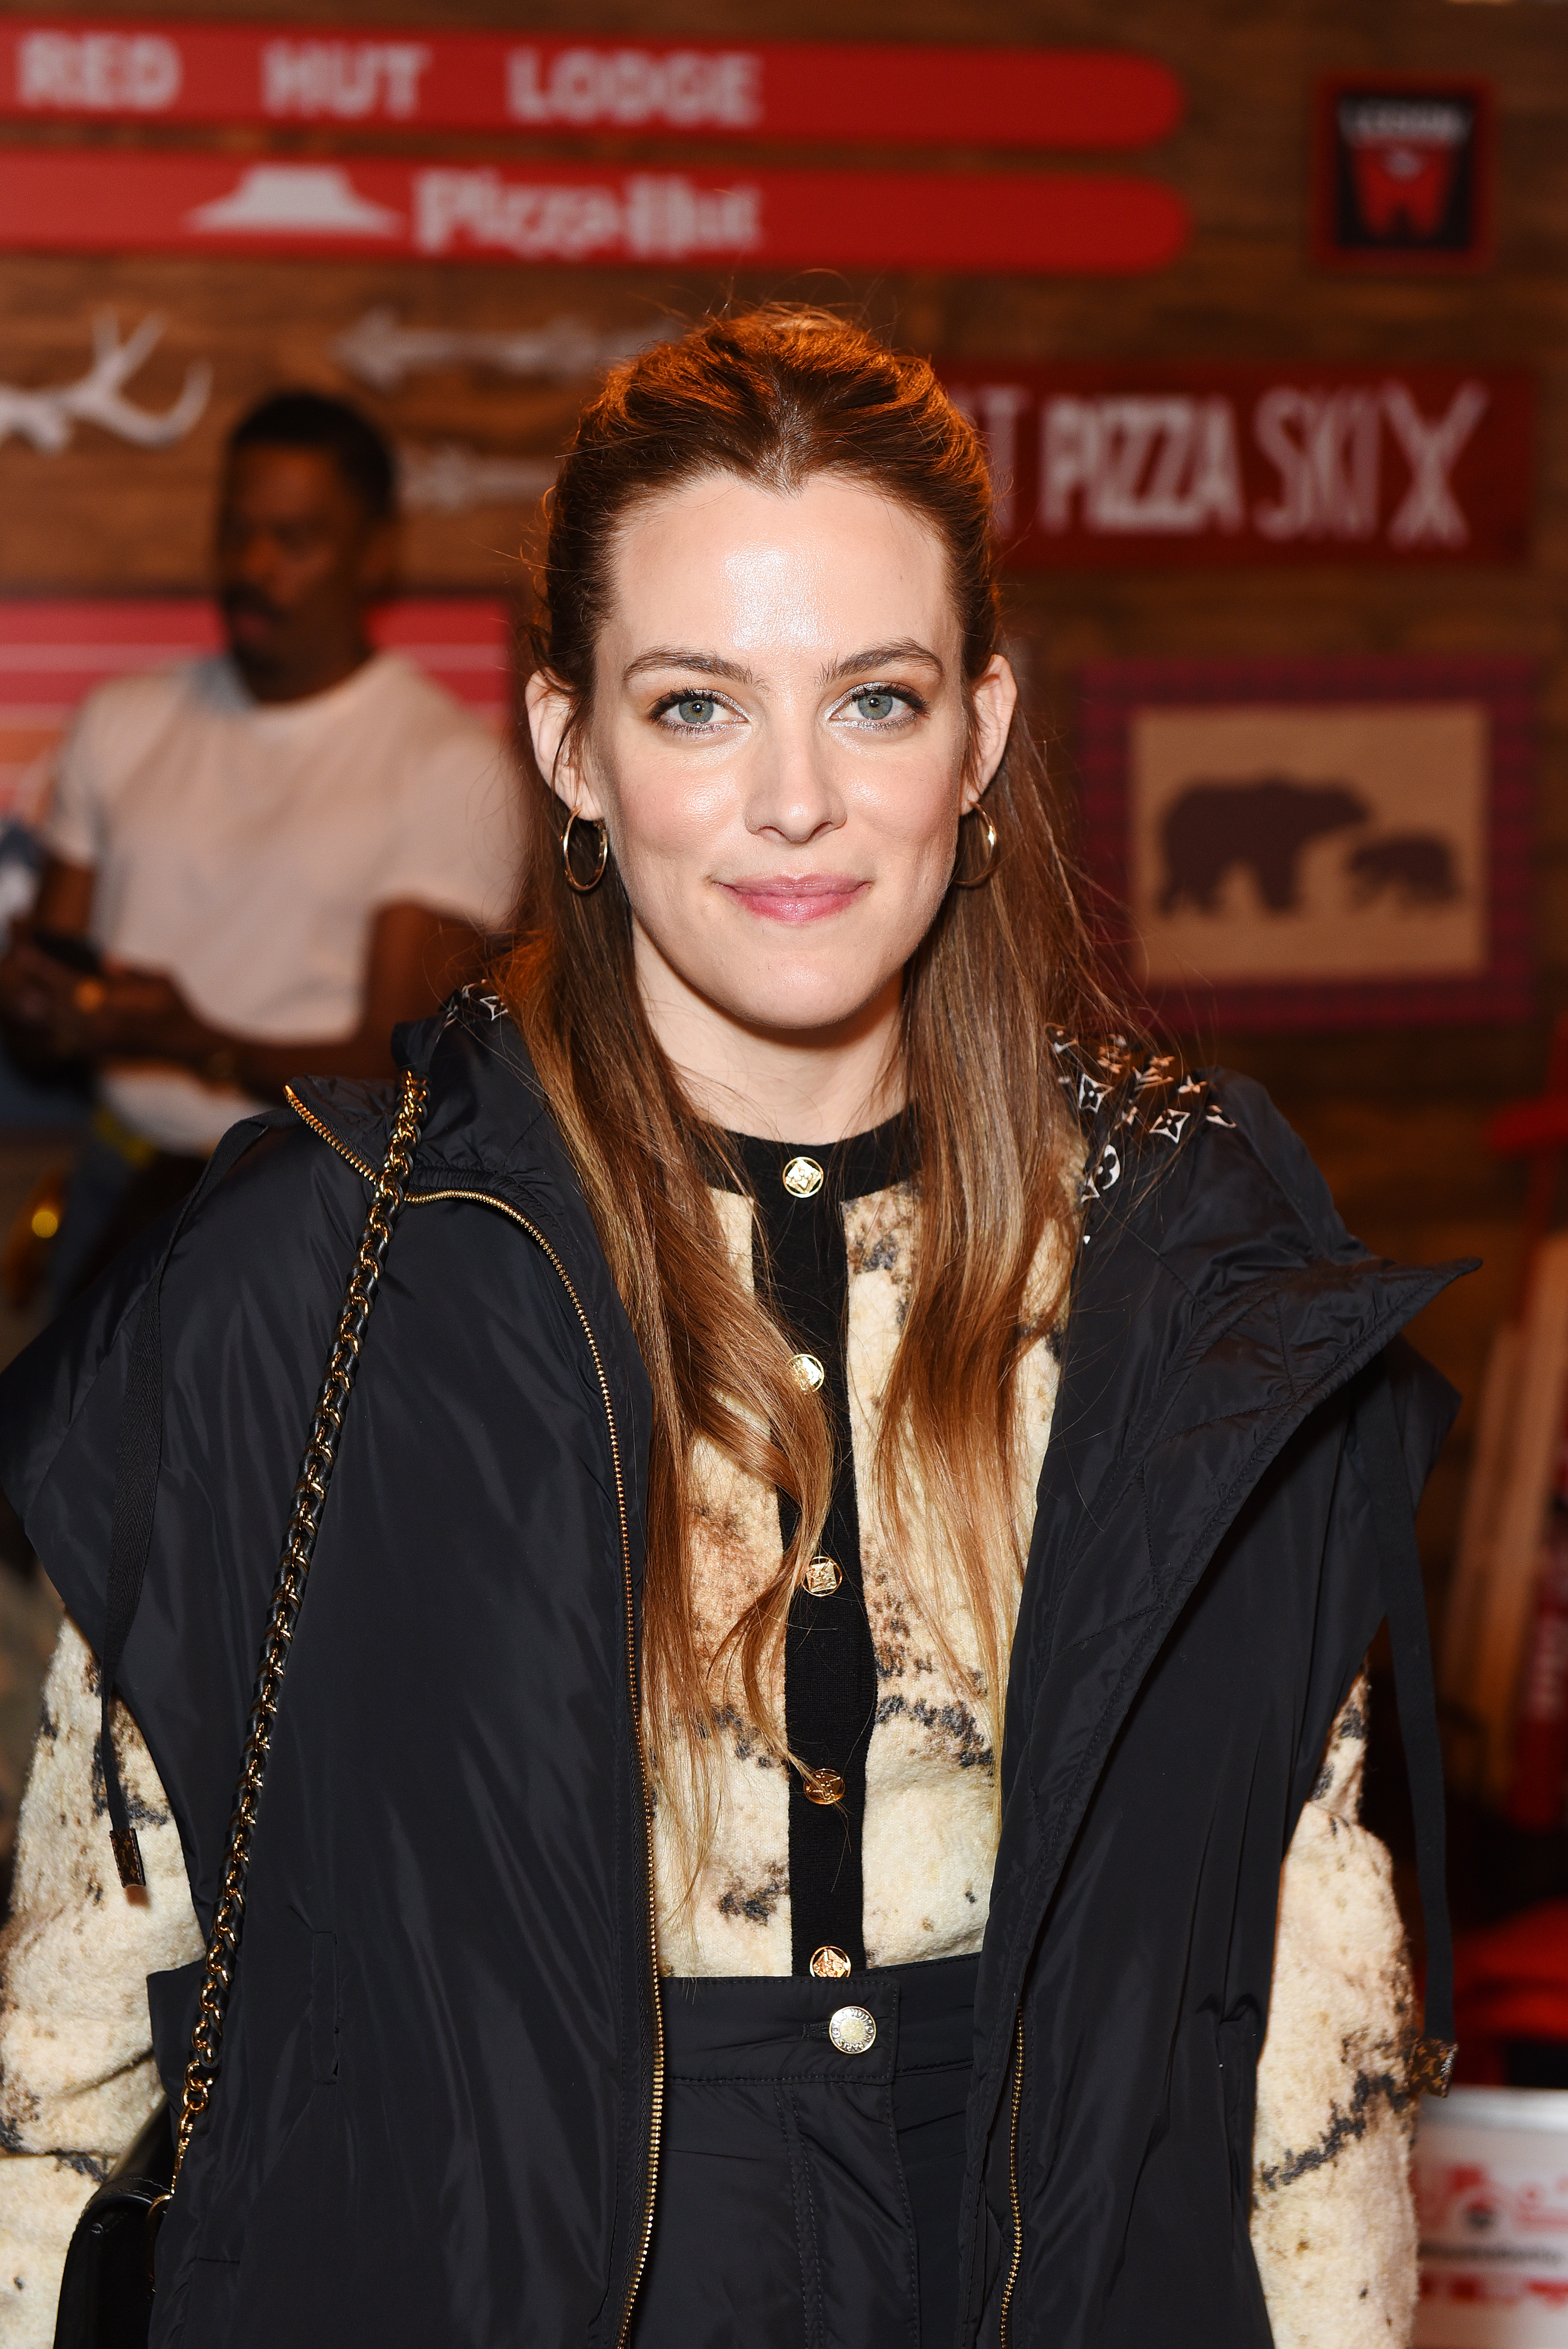 Riley Keough at the Pizza Hut x Legion M Lounge during Sundance Film Festival on January 25, 2020 in Park City, Utah.